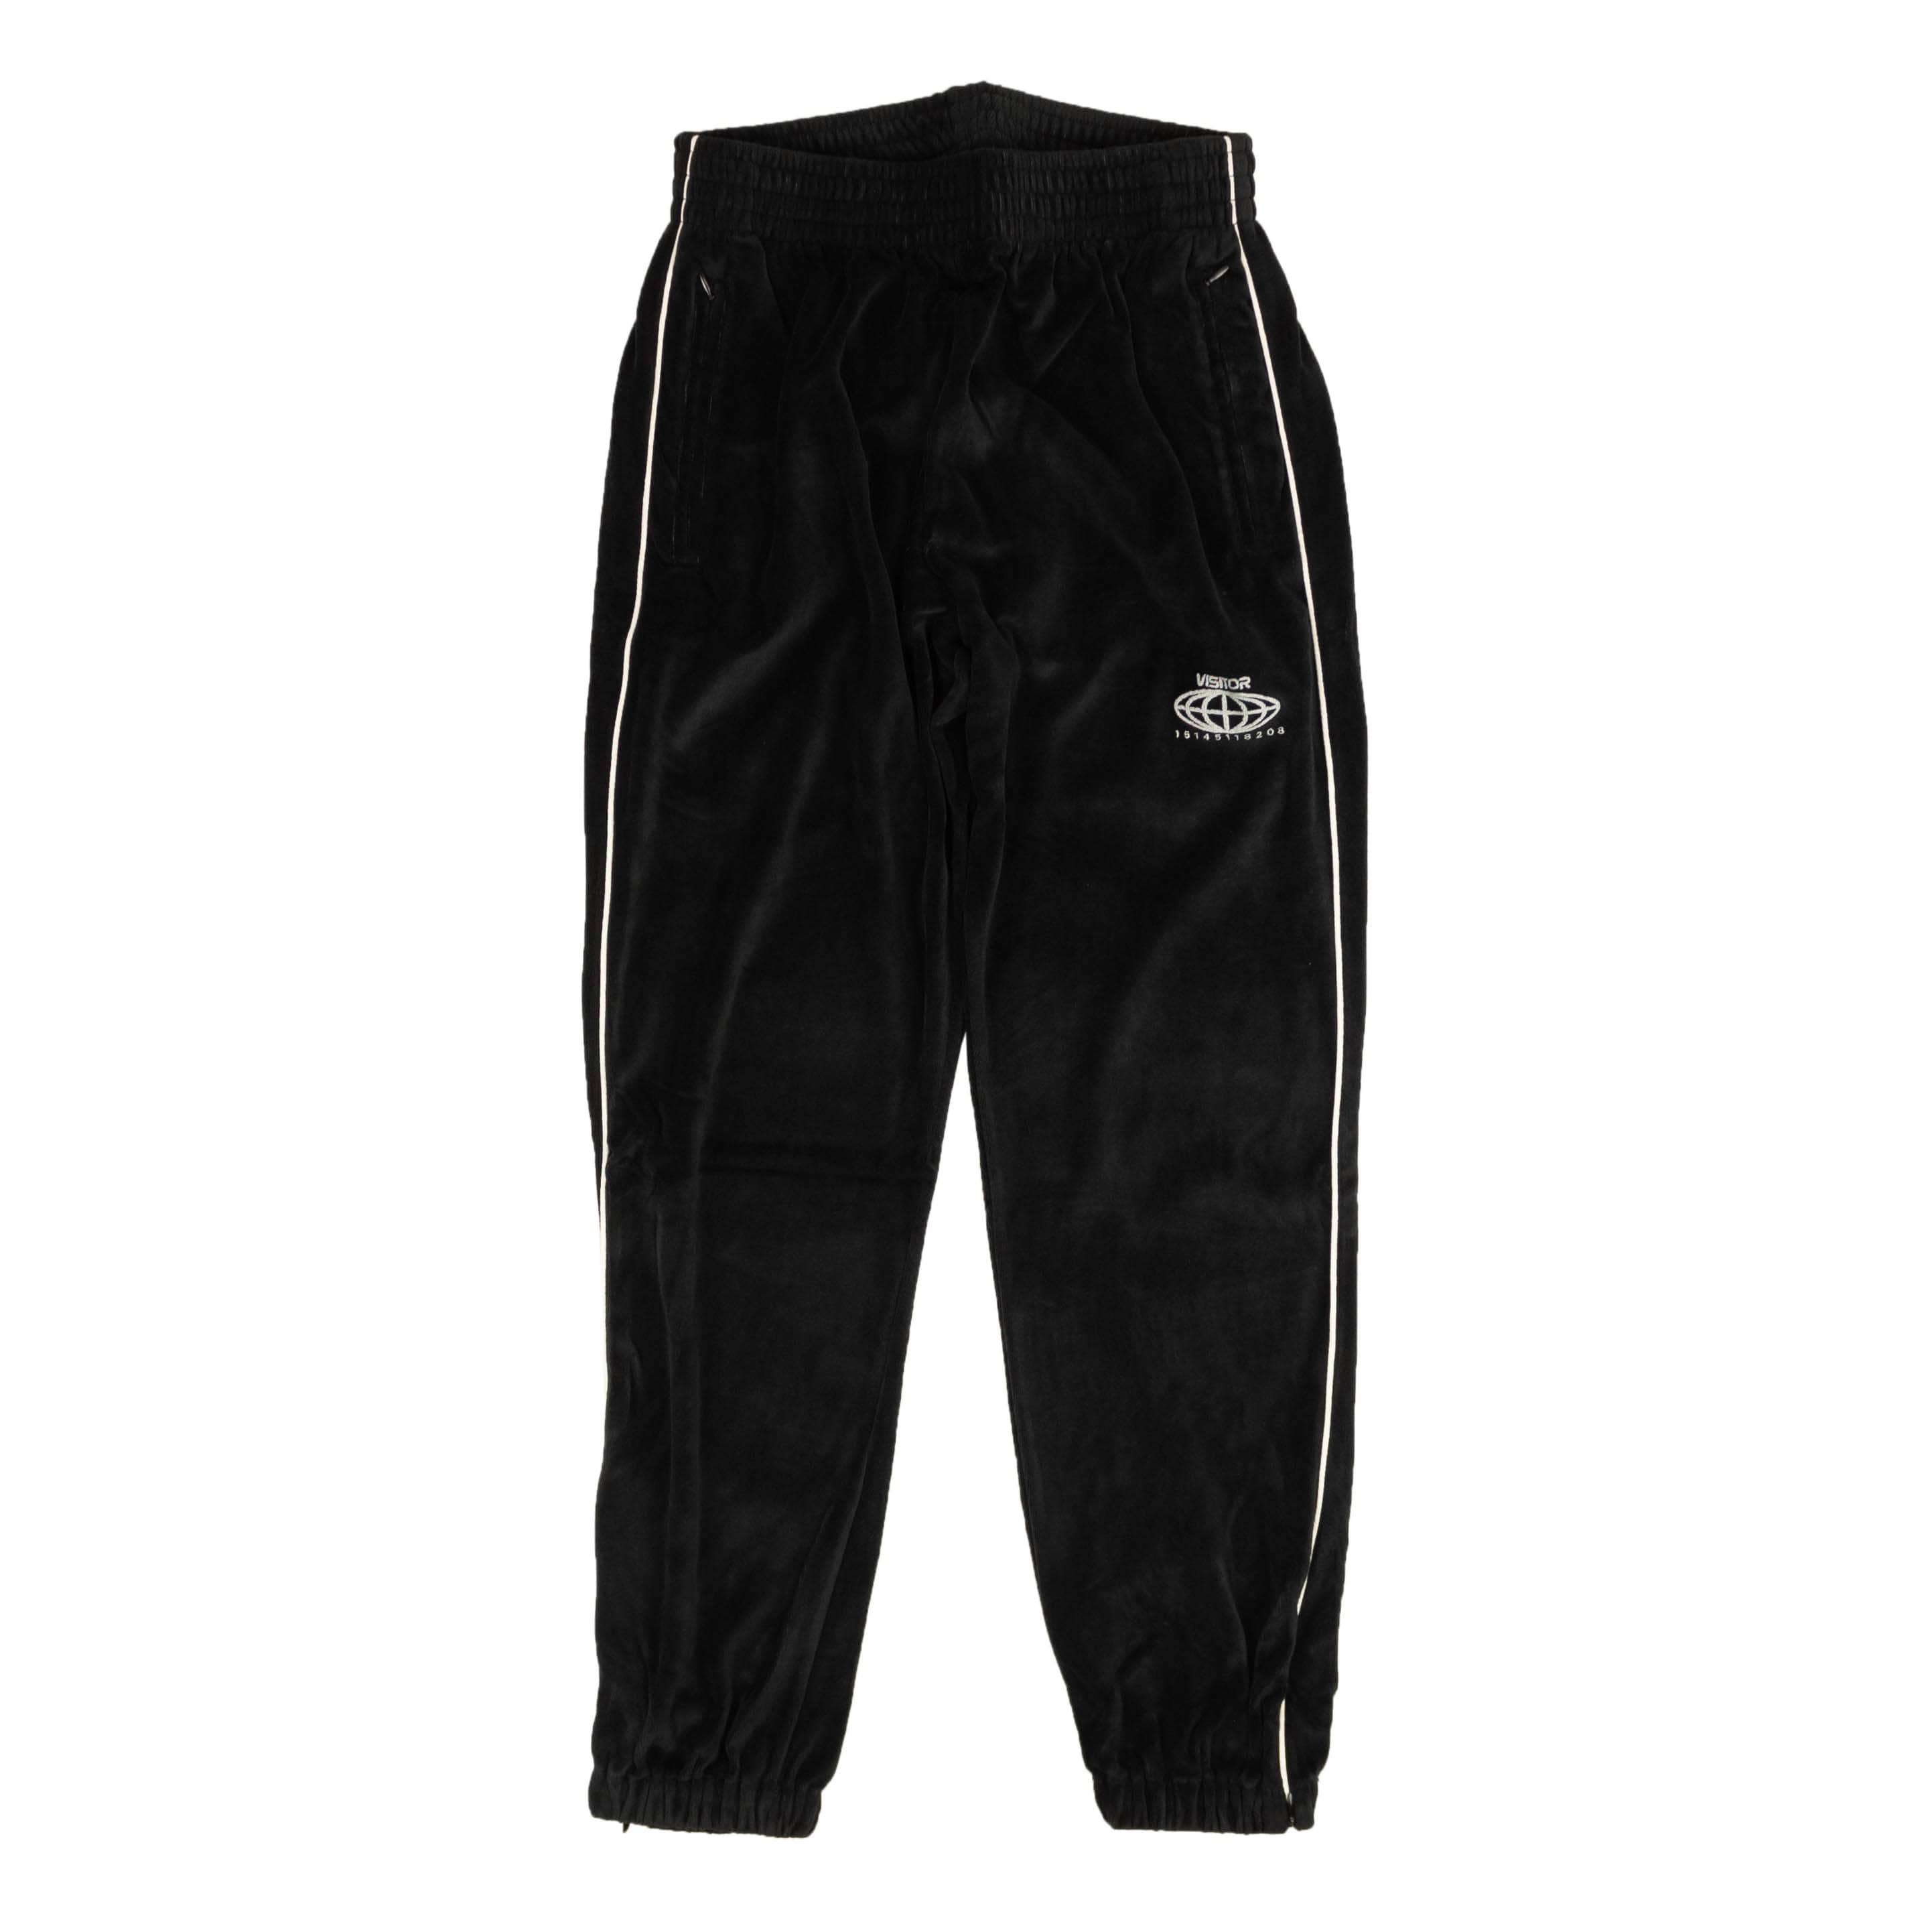 Visitor on Earth channelenable-all, chicmi, couponcollection, gender-mens, main-clothing, mens-joggers-sweatpants, mens-shoes, size-l, size-m, size-s, size-xl, size-xs, under-250, visitor-on-earth Black Velour Logo Sweatpants